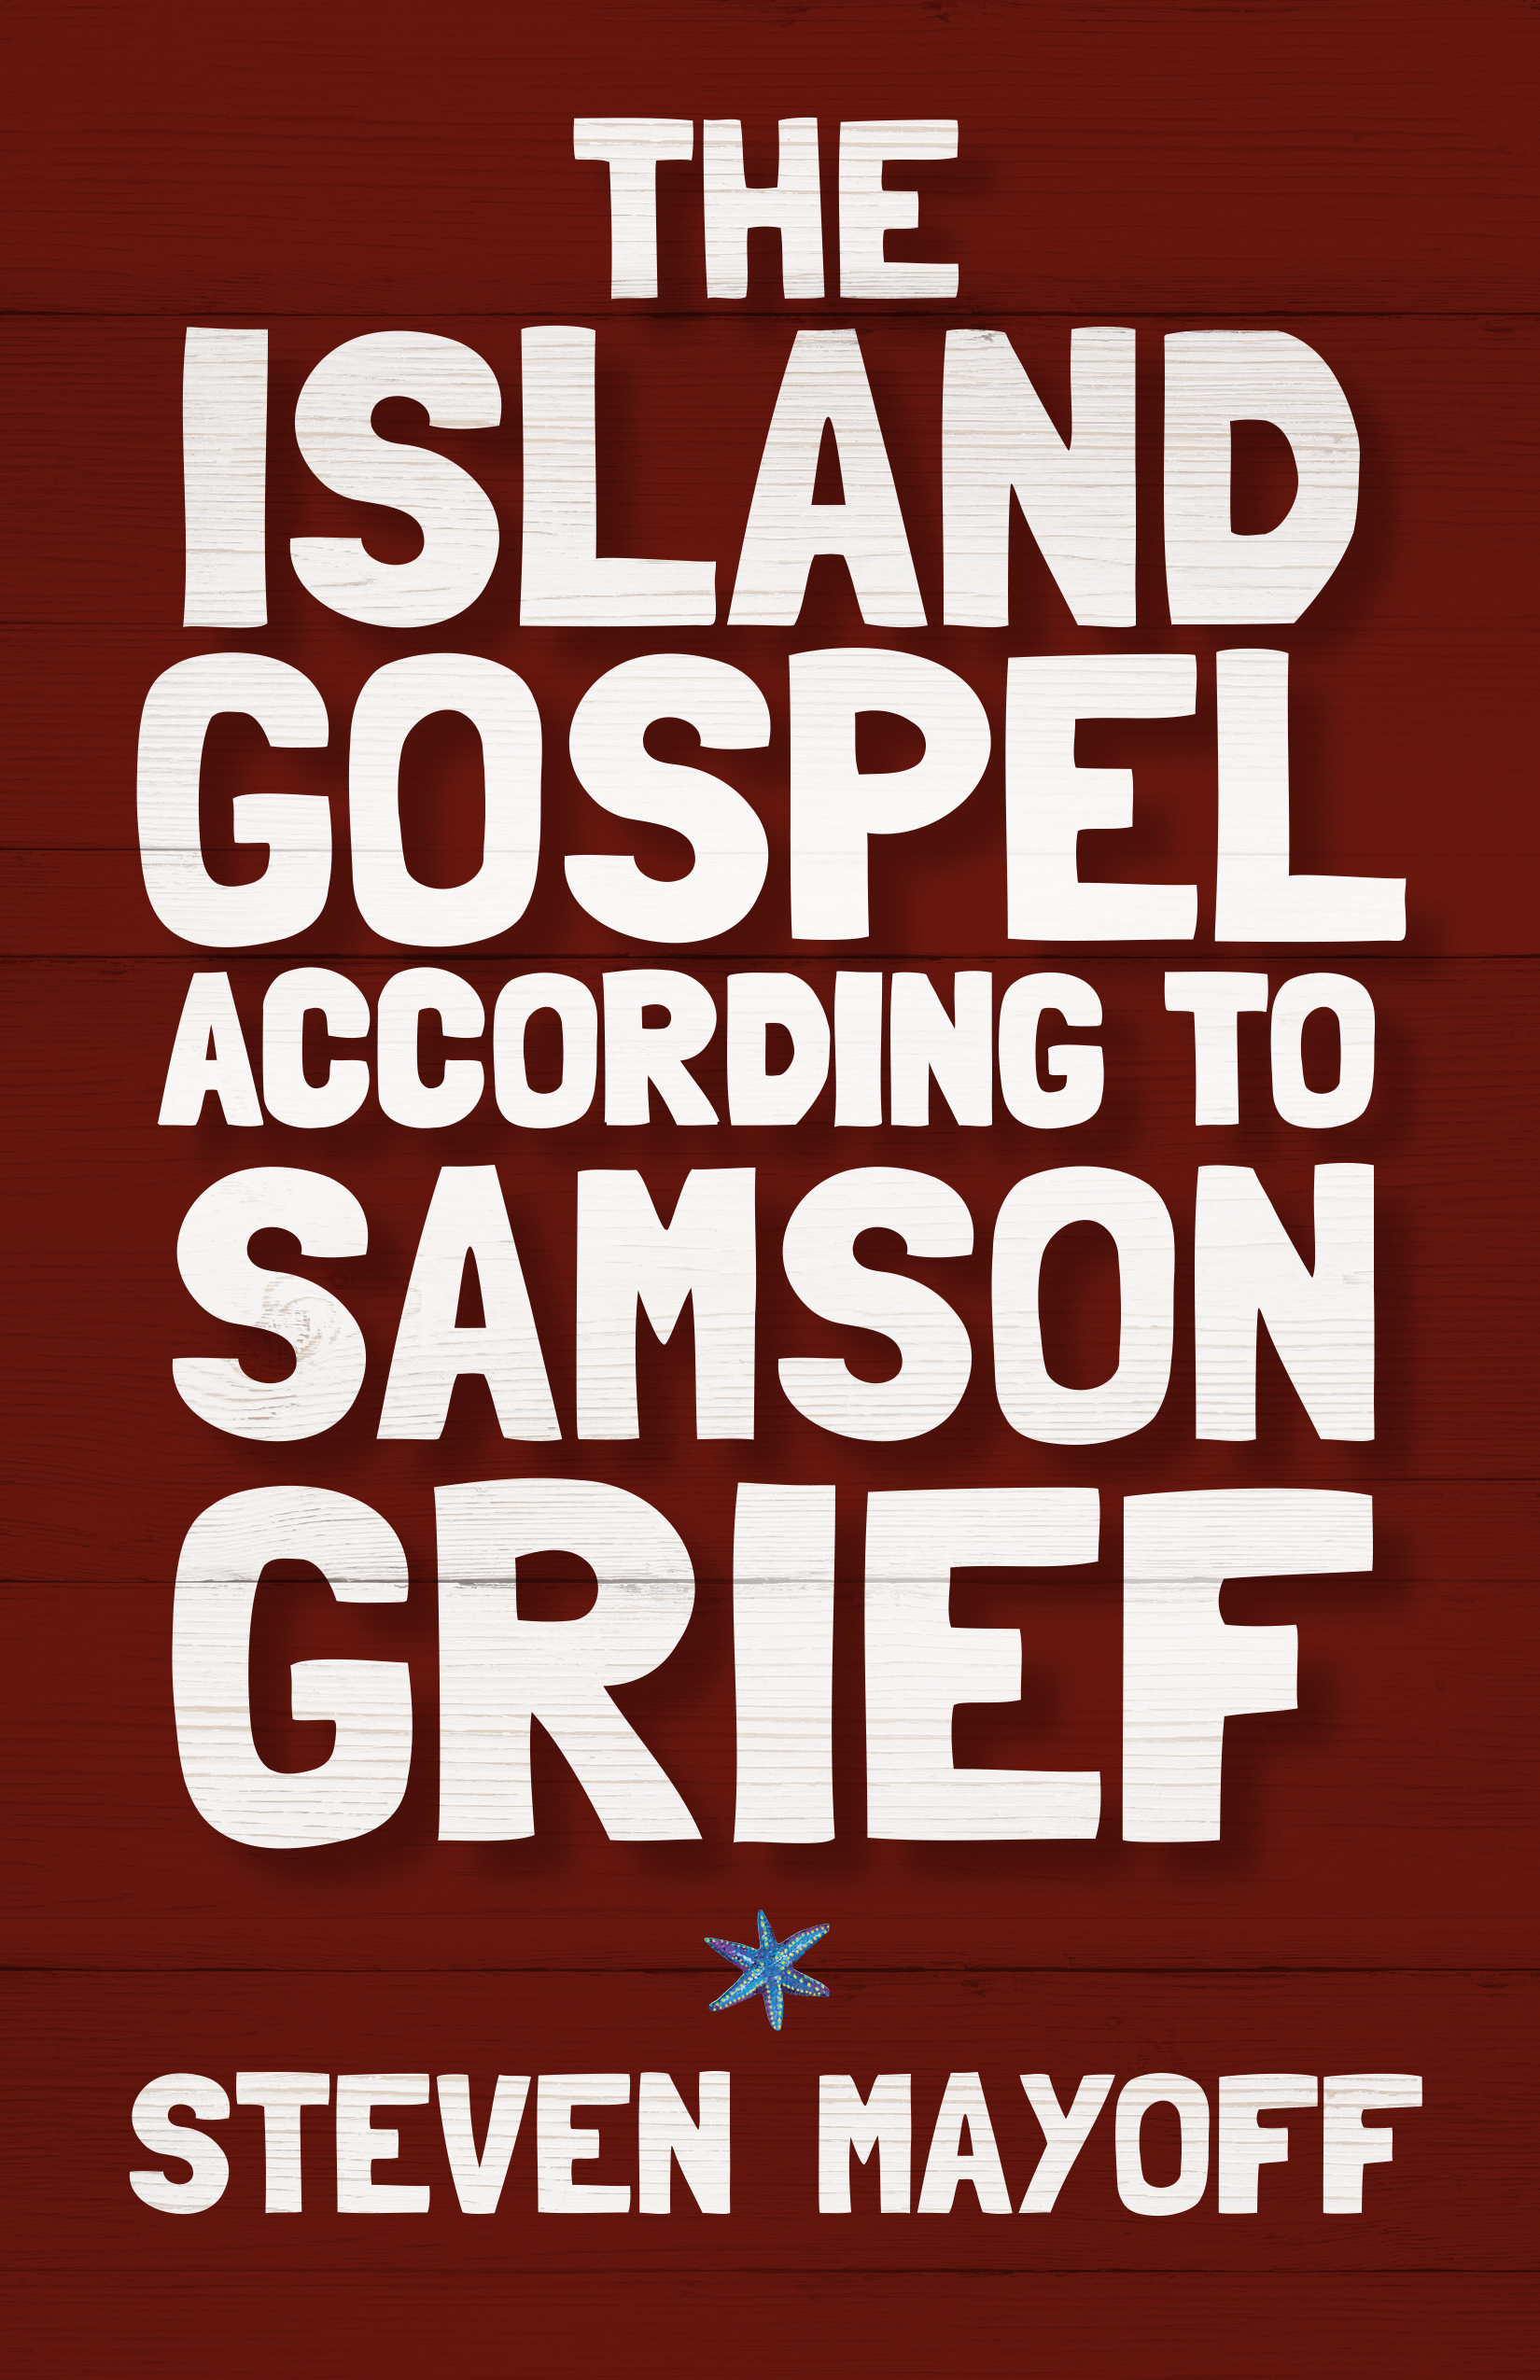 The Island Gospel According to Samson Grief by Steven Mayoff.